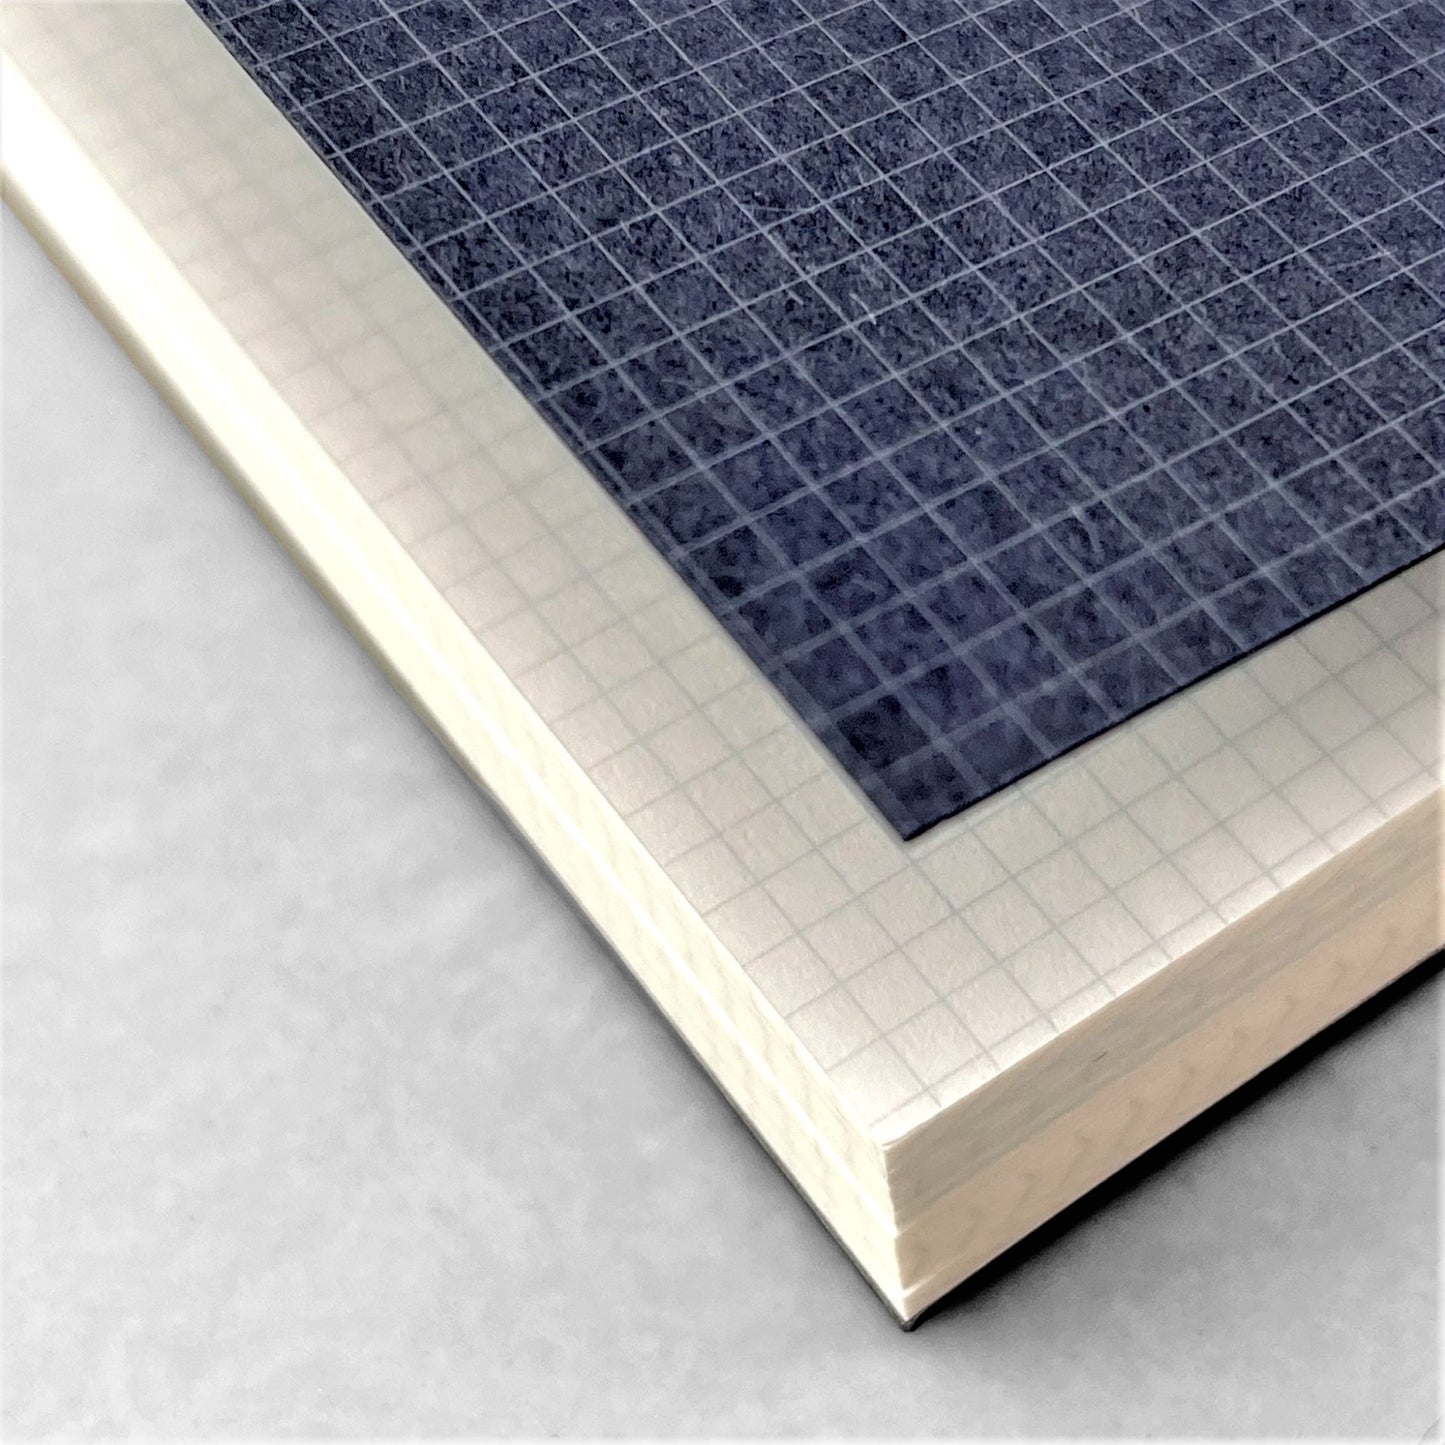 A5 softcover notebook with grid pages. The cover is dark blue with a white grid, black spine and branding in silver. By Japanese brand Kleid